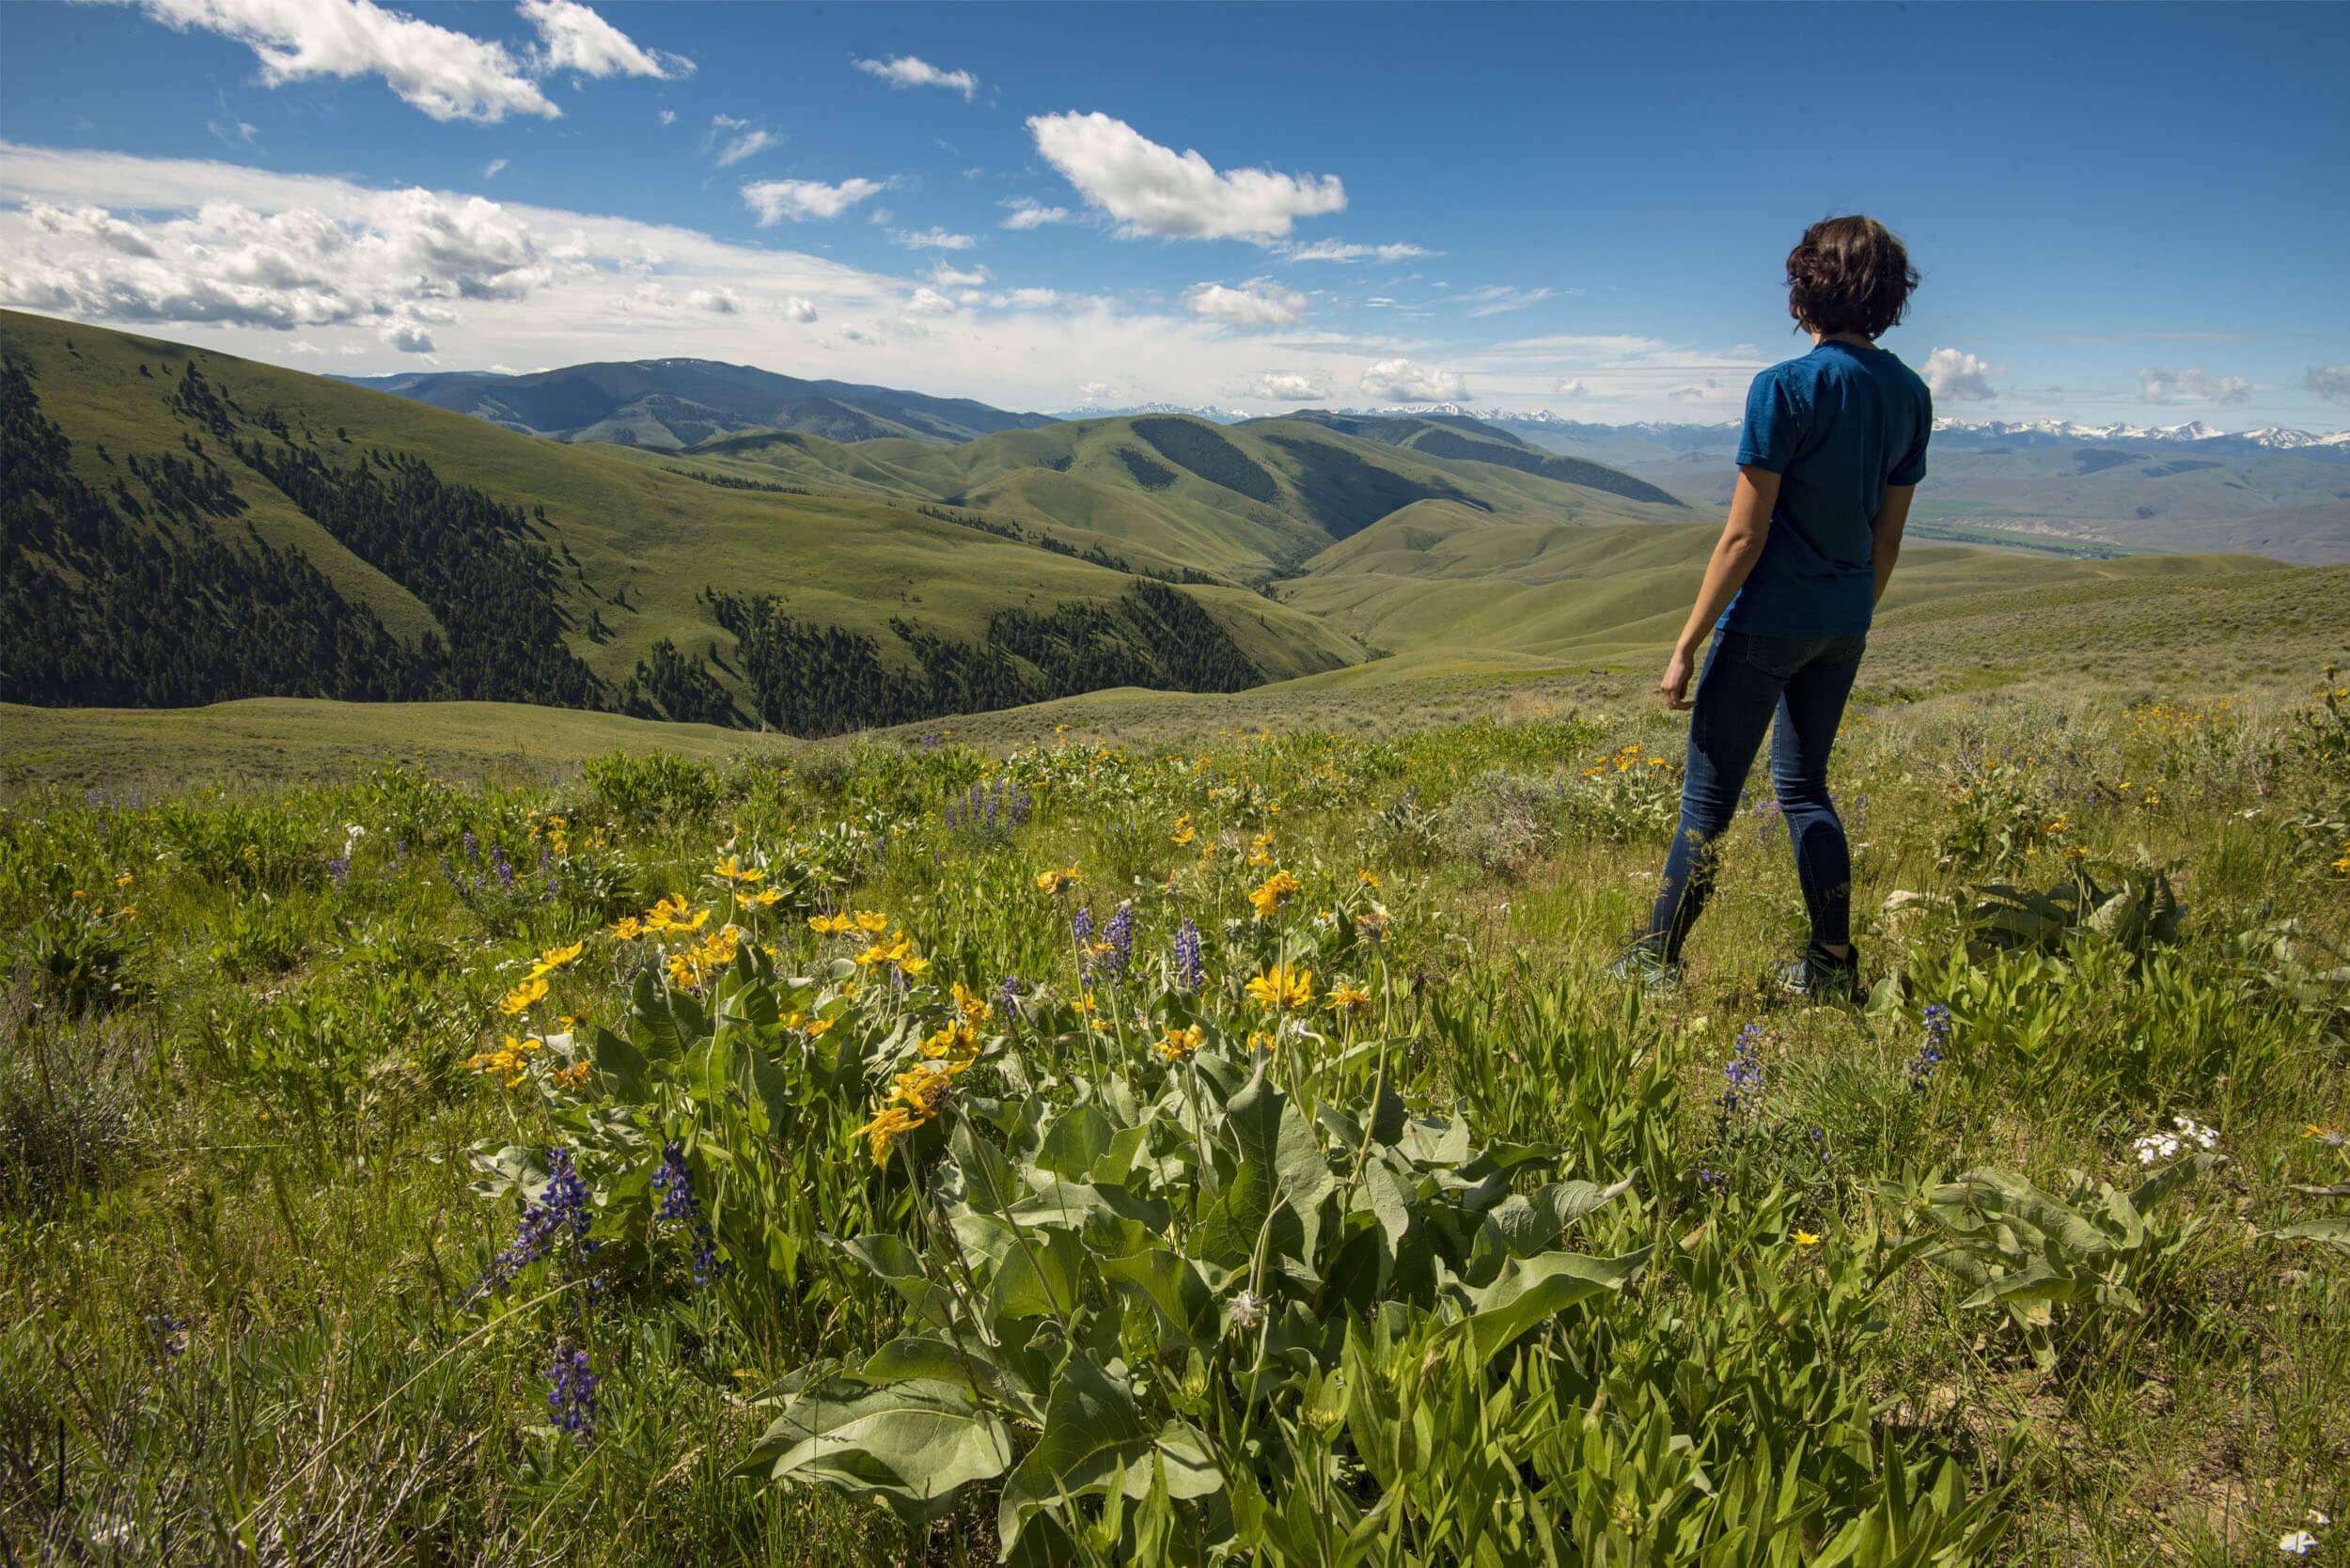 A person looks out over the rolling scenery of the Lewis and Clark Backcountry Byway.